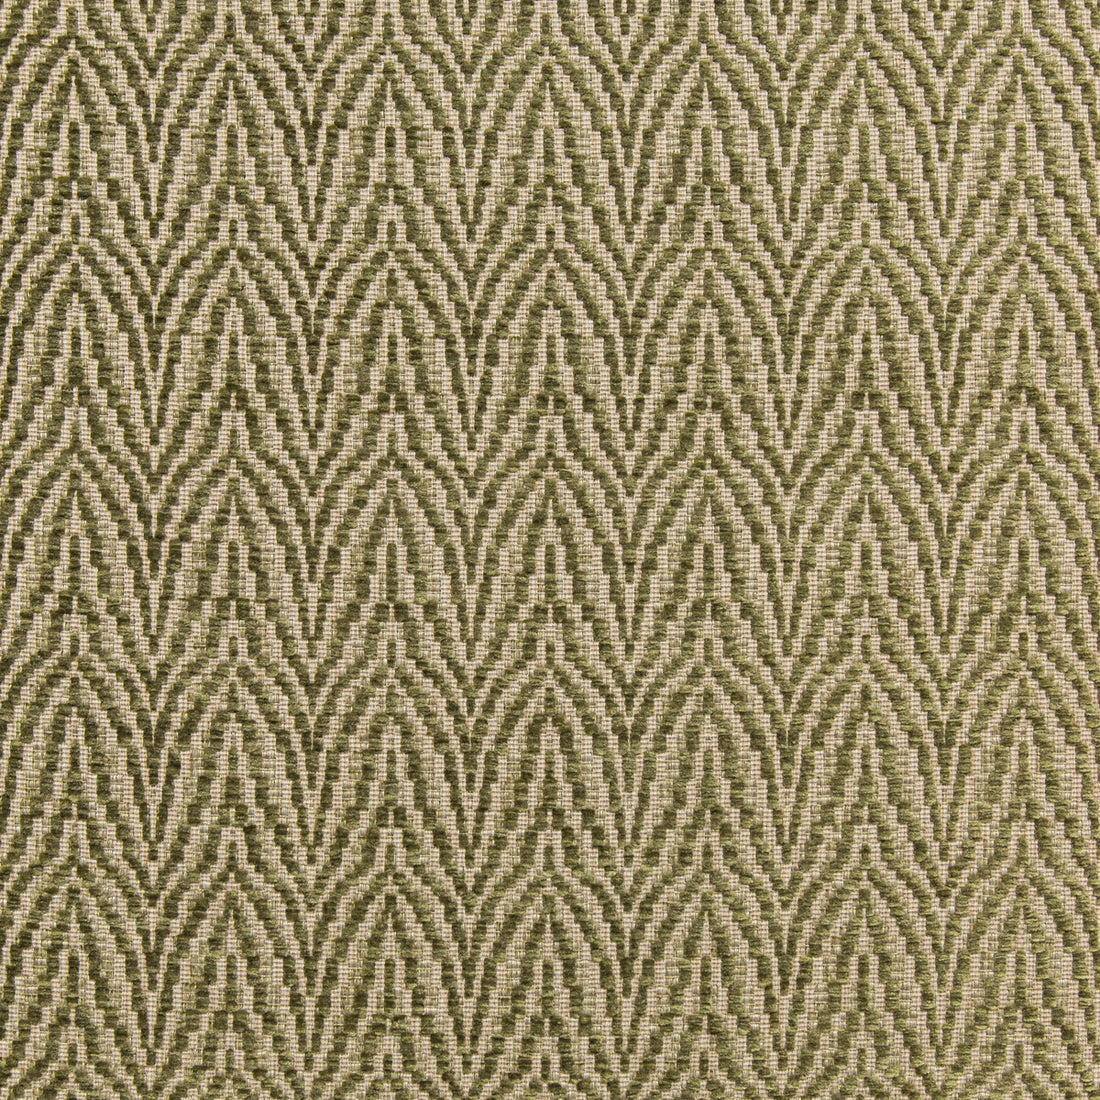 Blyth Weave fabric in moss color - pattern 2020108.340.0 - by Lee Jofa in the Linford Weaves collection